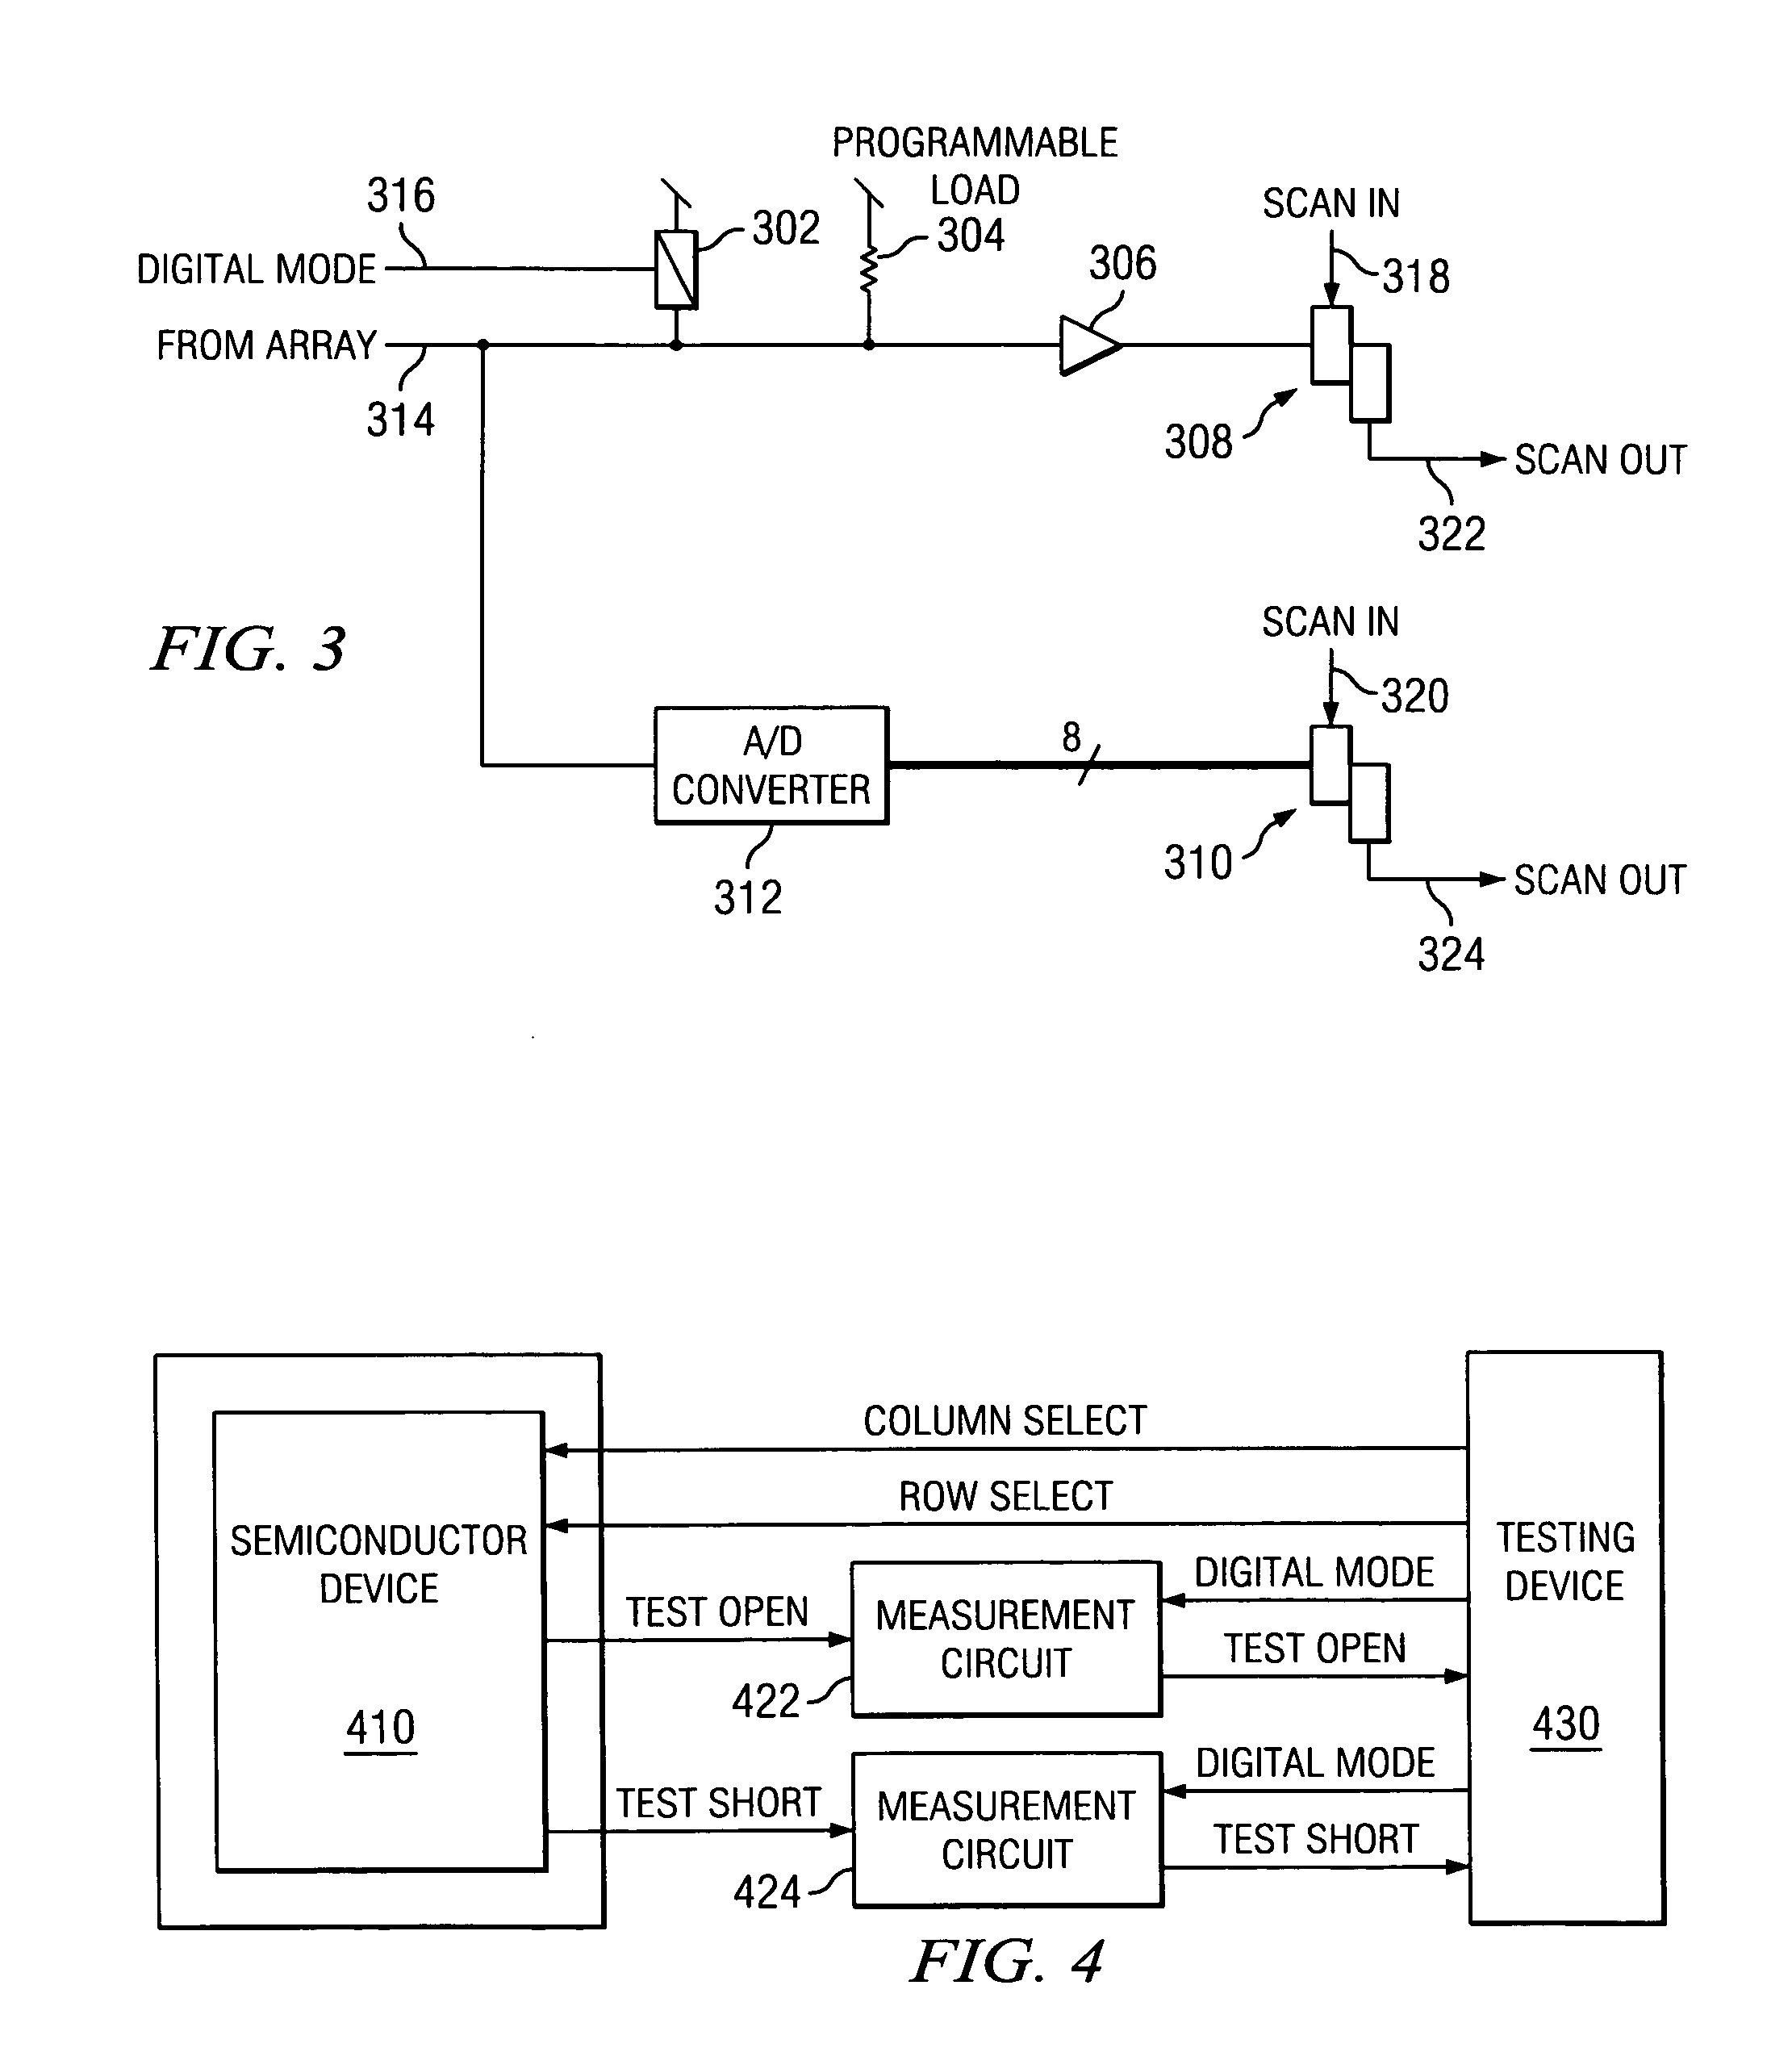 Defect monitor for semiconductor manufacturing capable of performing analog resistance measurements